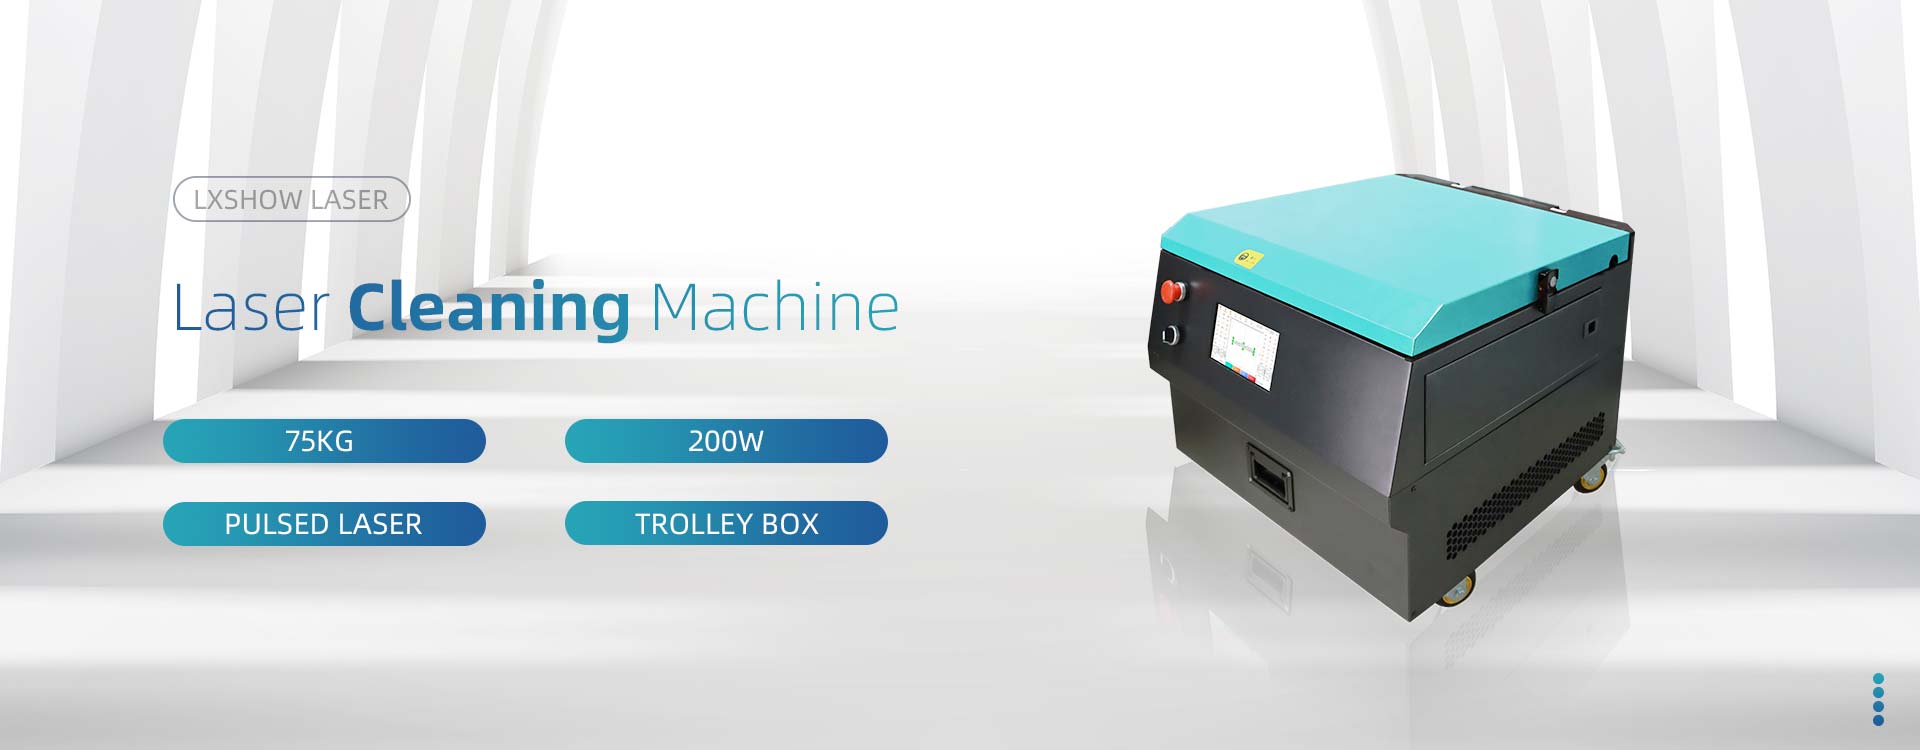 product-200w Fiber Laser Cleaning Machine High Quality Supplier In China-Lxshow-img